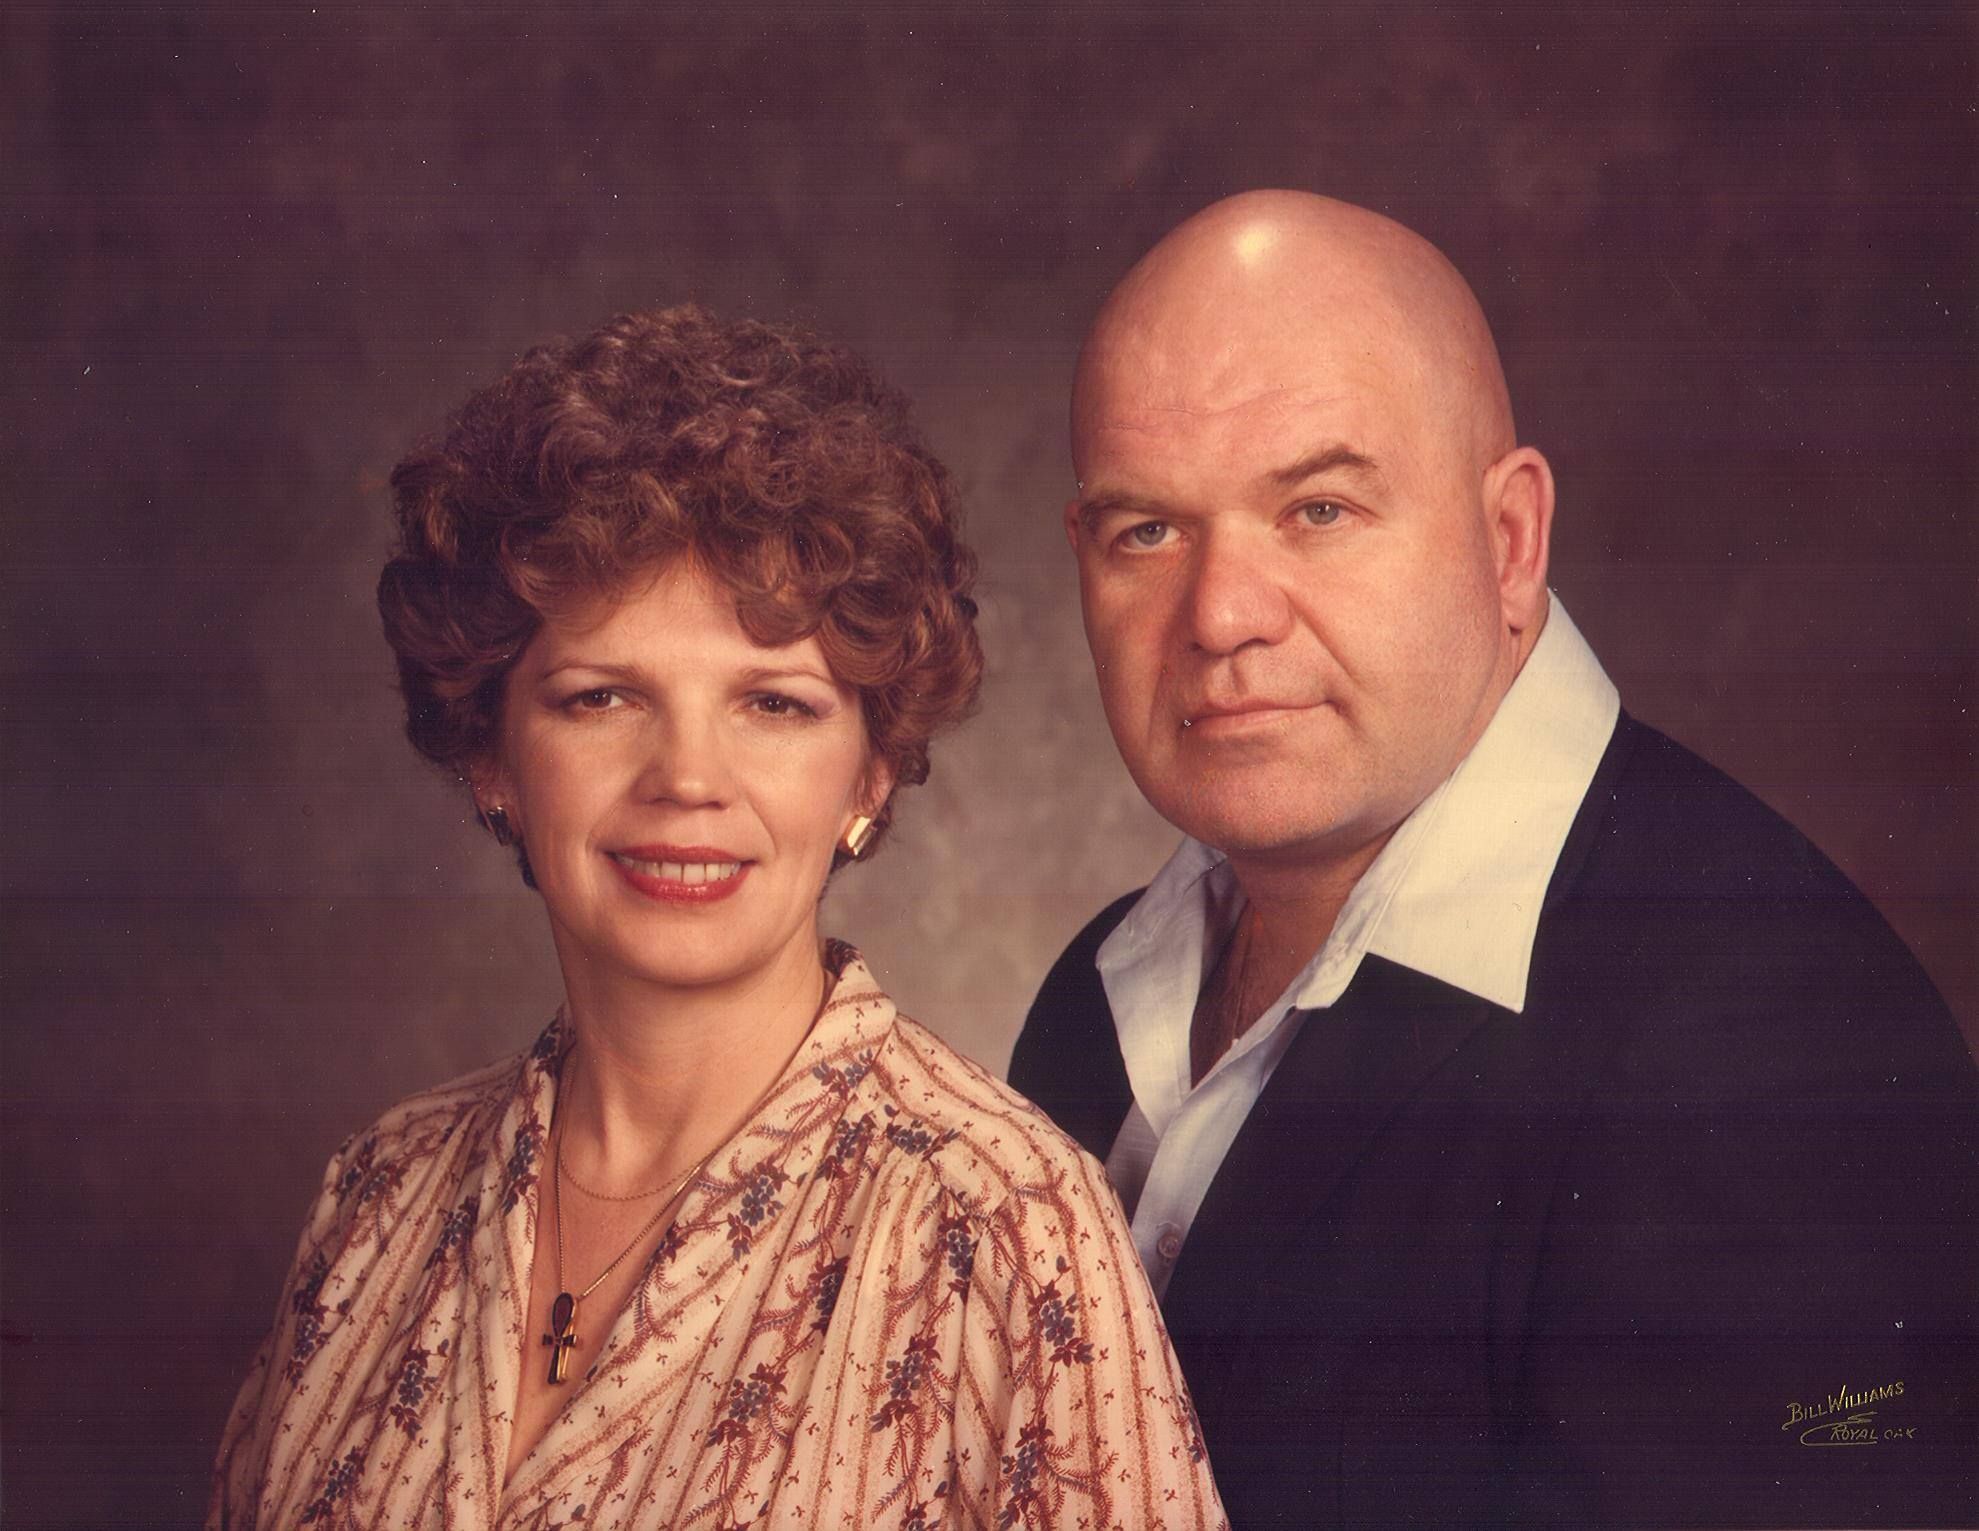 George Steele and his wife, Pat, were married for 61 years